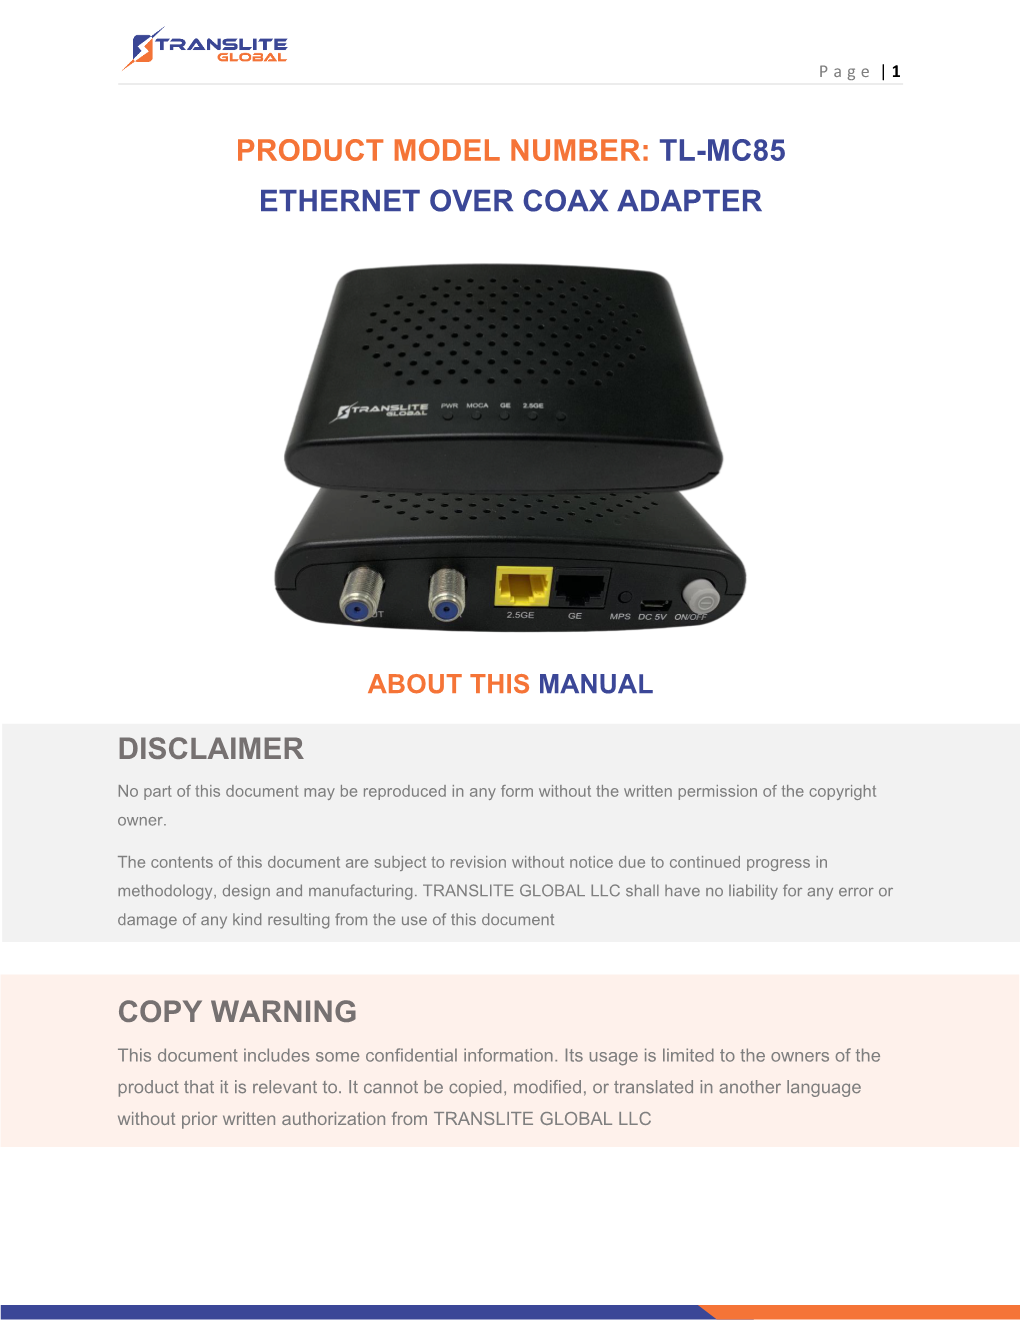 Tl-Mc85 Ethernet Over Coax Adapter Disclaimer Copy Warning